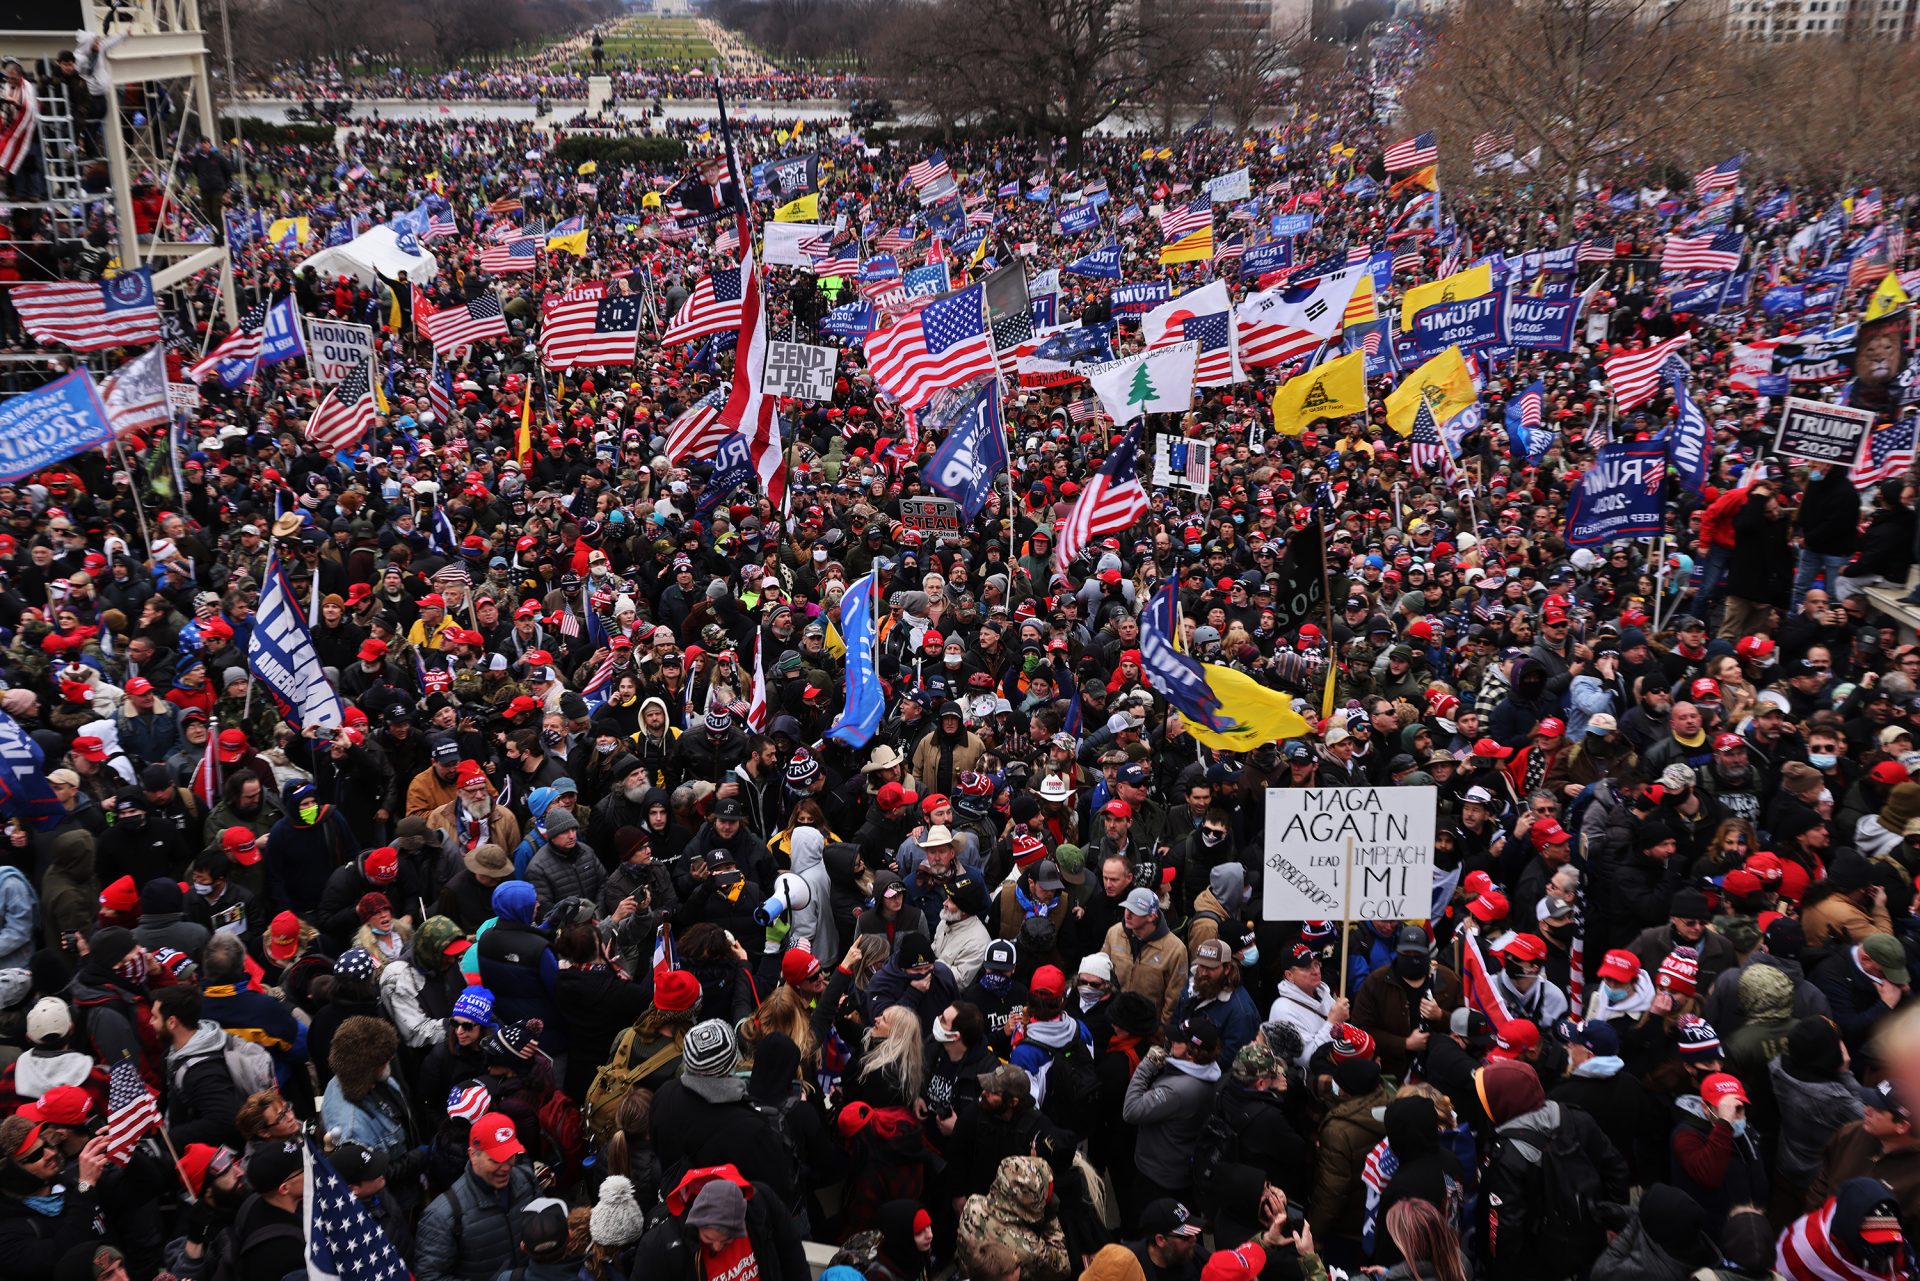 Thousands of Trump supporters gather outside the U.S. Capitol following a "Stop the Steal" rally on Jan. 6. They stormed the historic building, breaking windows and clashing with police. Nearly two months later some 250 rioters are facing charges, including Richard Michetti of Pennsylvania.